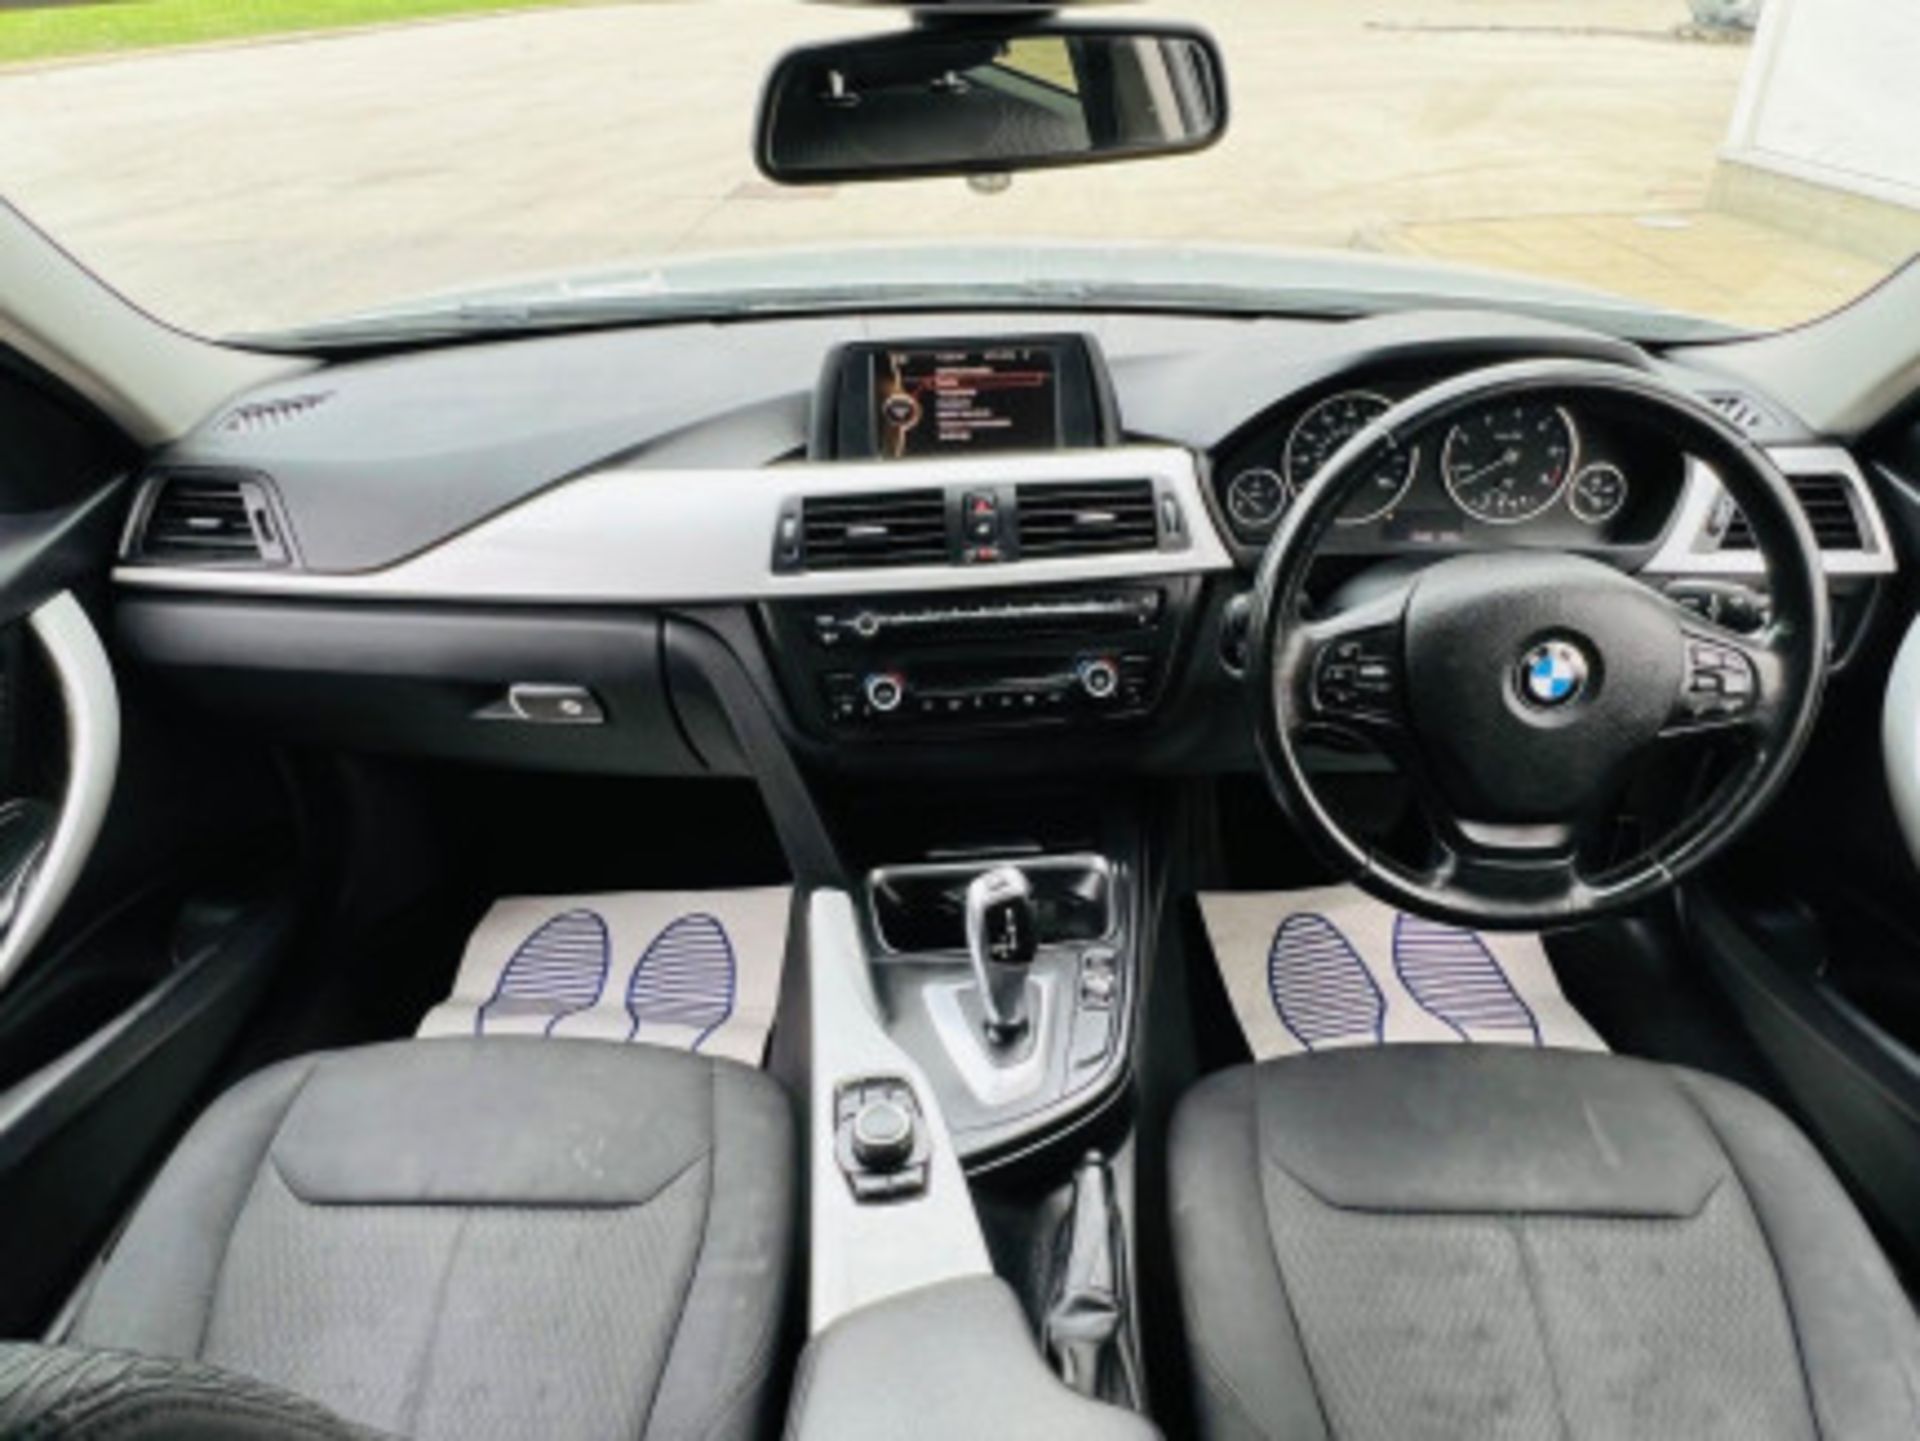 BMW 3 SERIES 2.0 DIESEL ED START STOP - A WELL-MAINTAINED GEM >>--NO VAT ON HAMMER--<< - Image 41 of 229